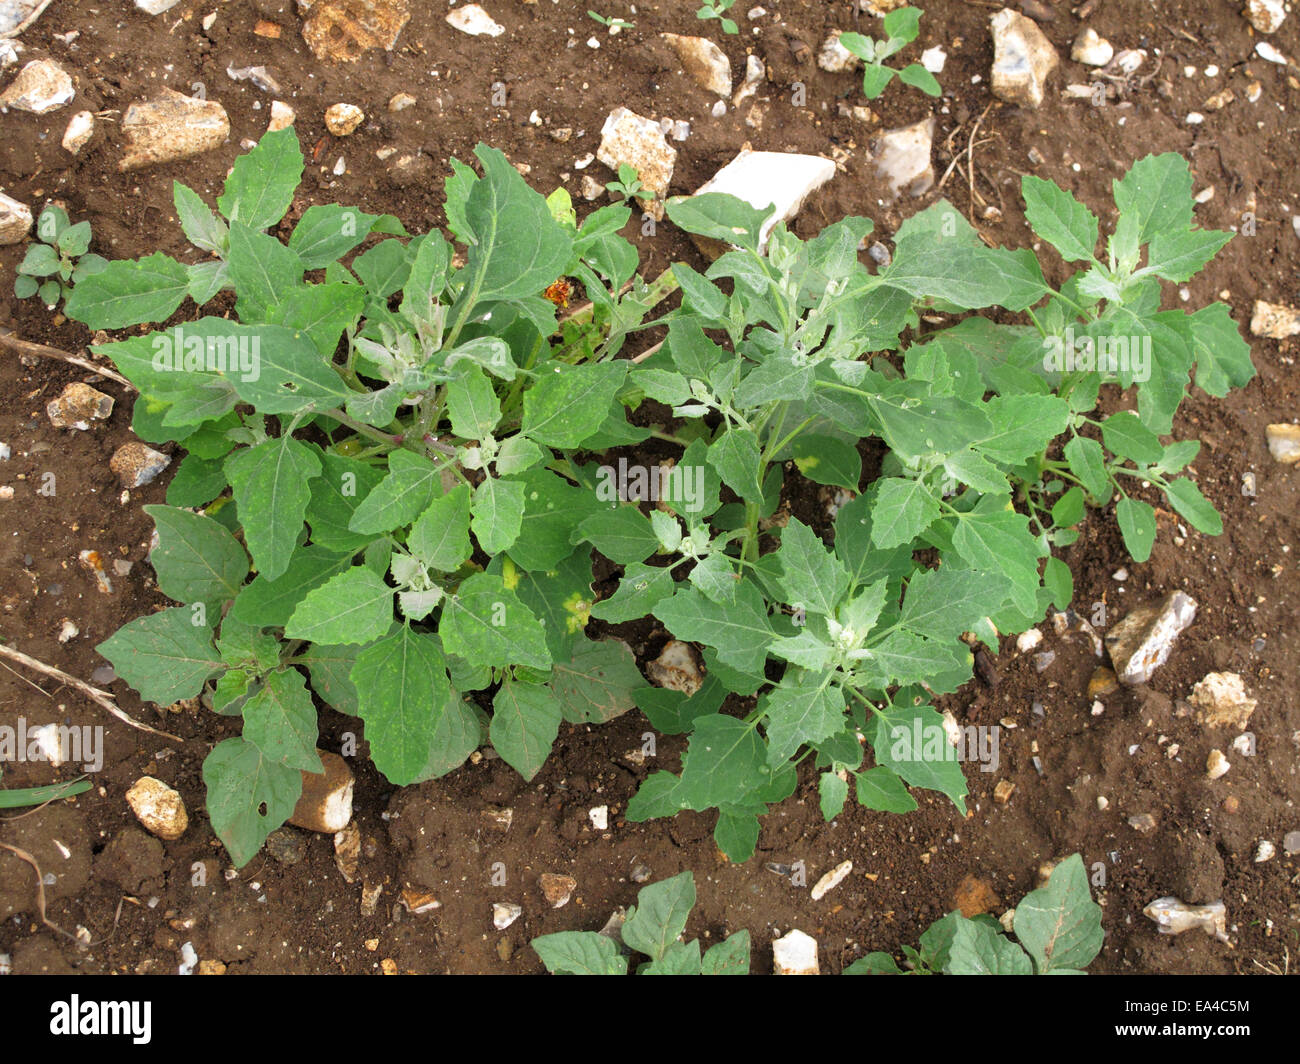 Fat hen, lamb's quarters or goosefoot, Chenopodium album, plant. An arable and garden weed and also a cultivated plant used in p Stock Photo